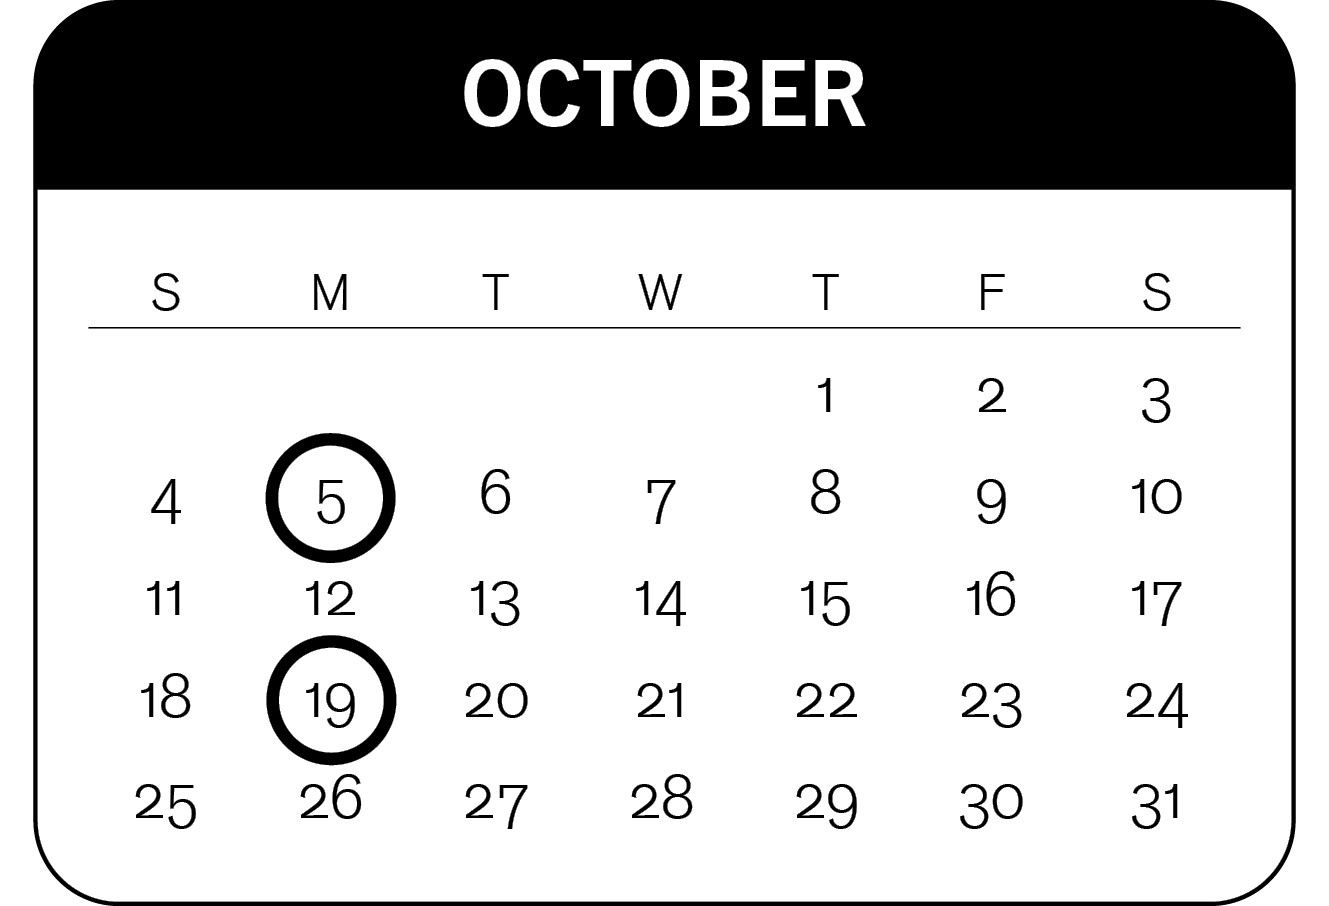 Calendar of the month of October